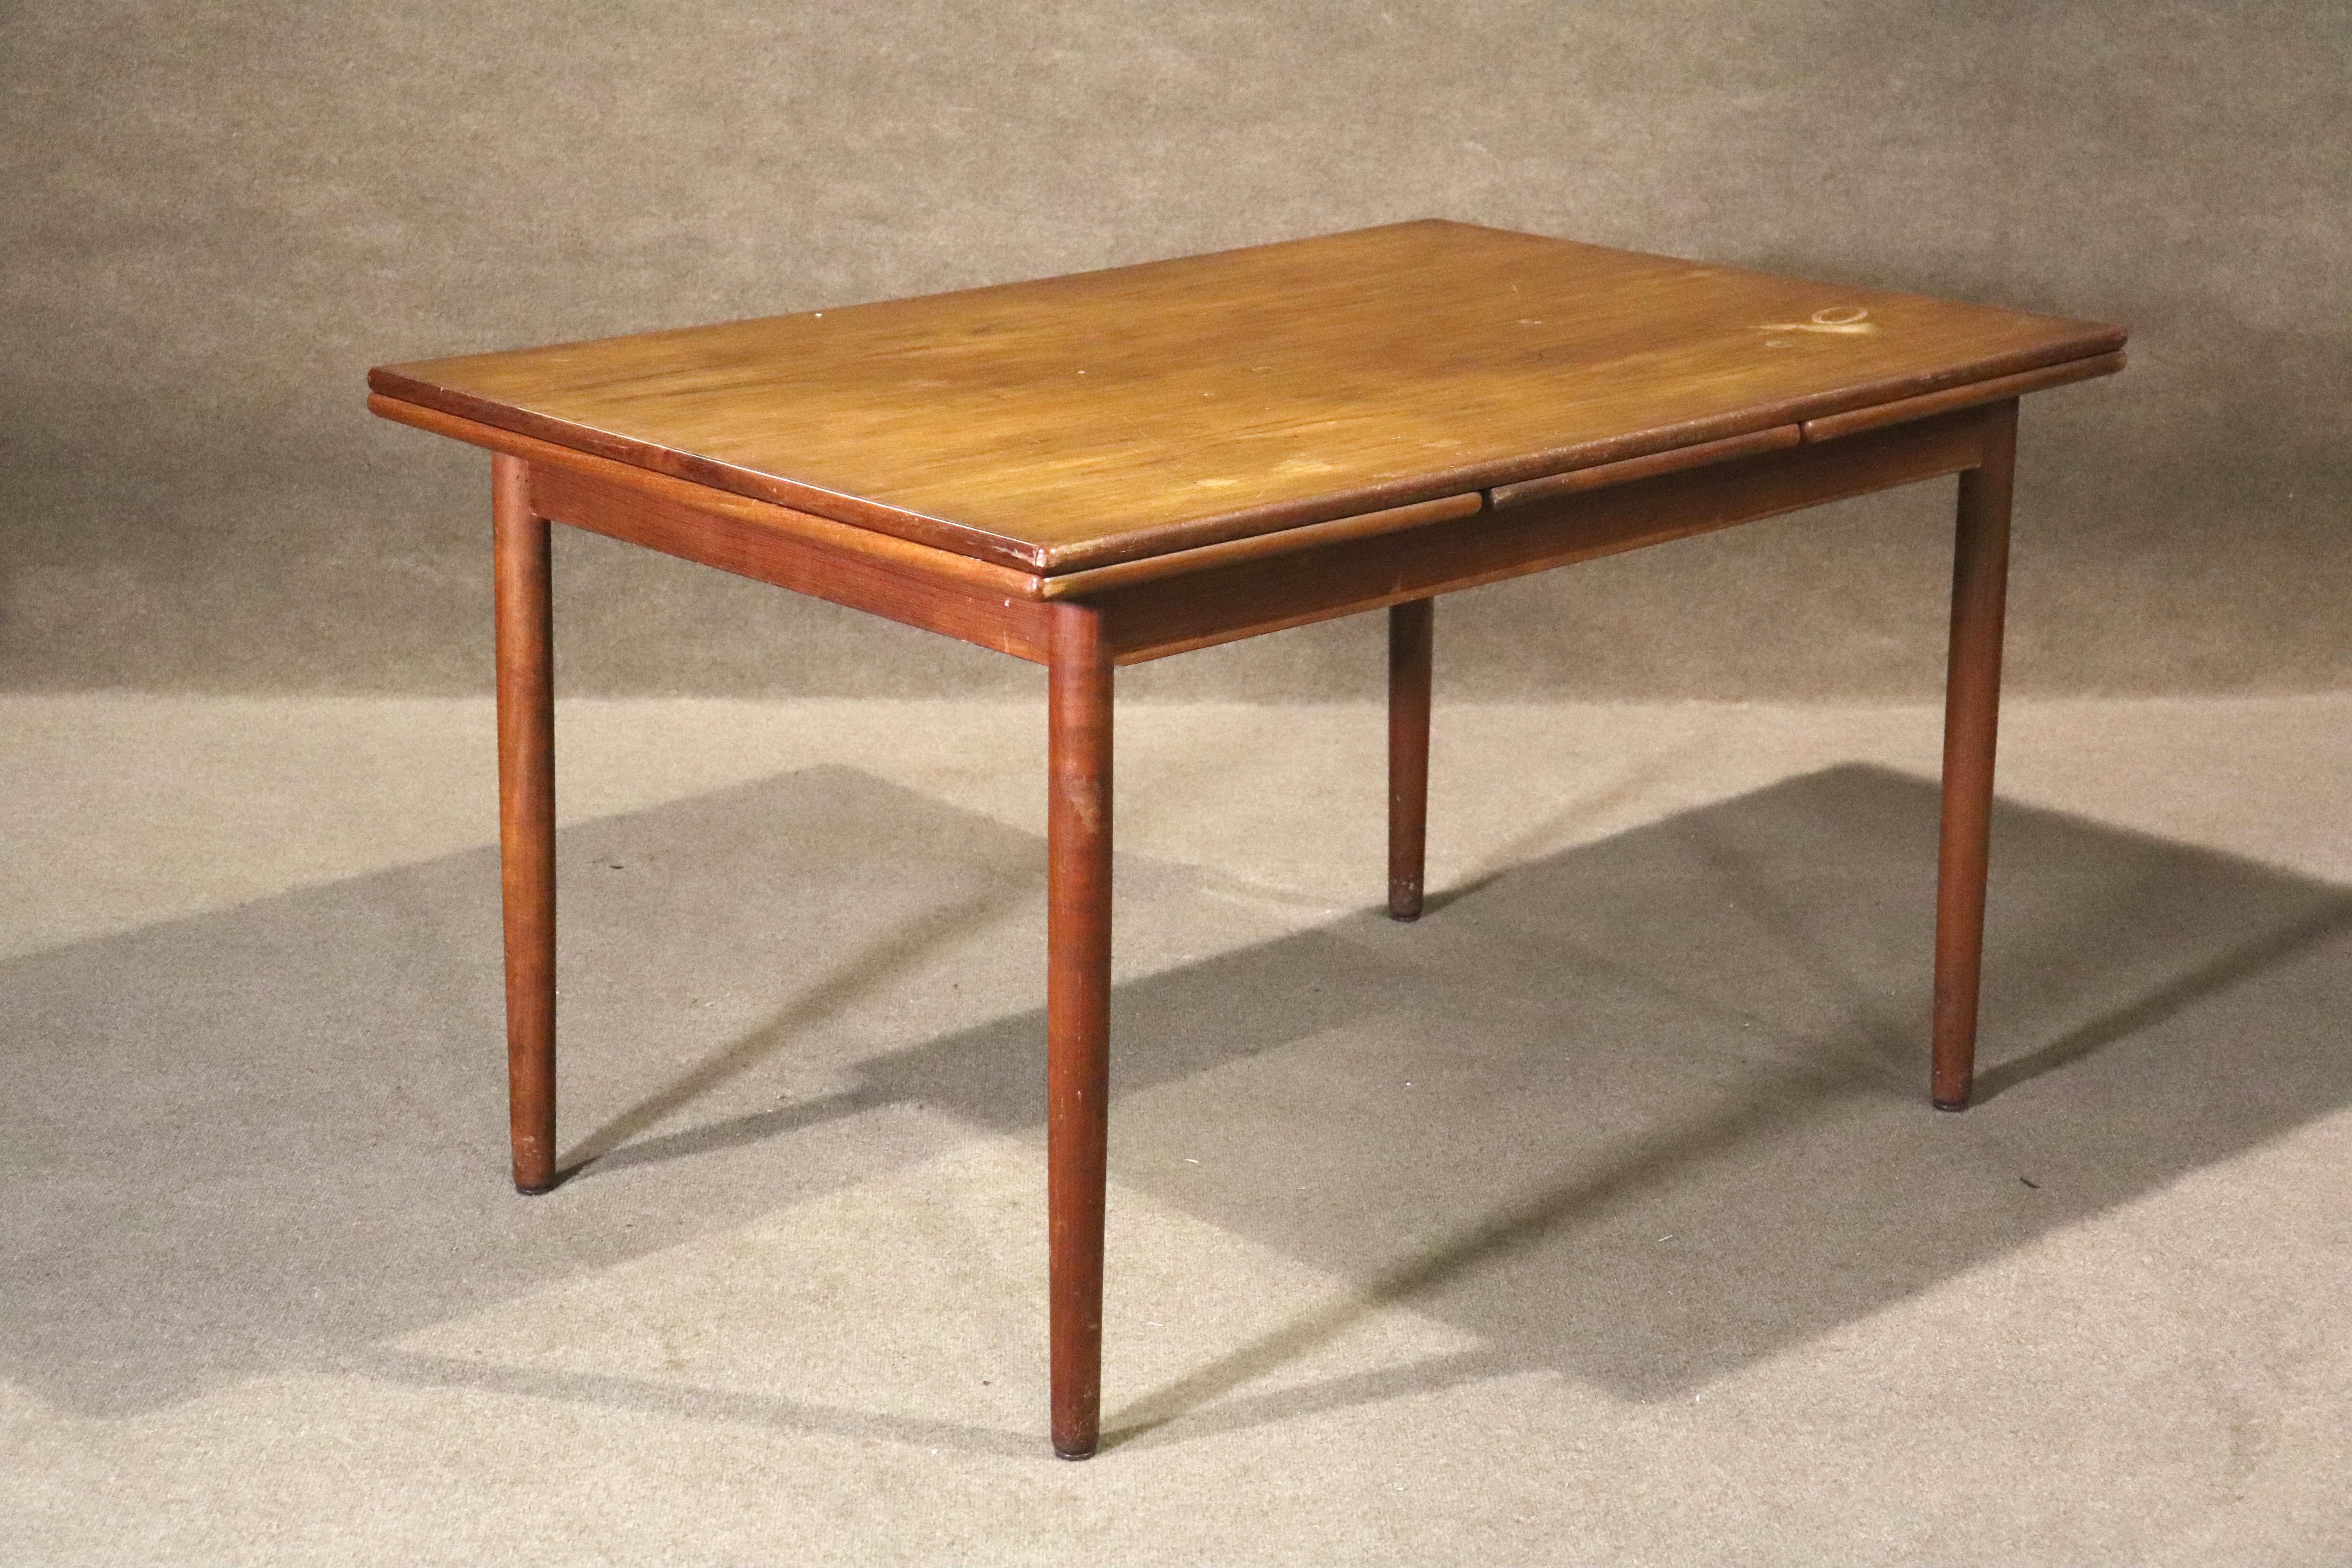 Danish made dining table with two 18